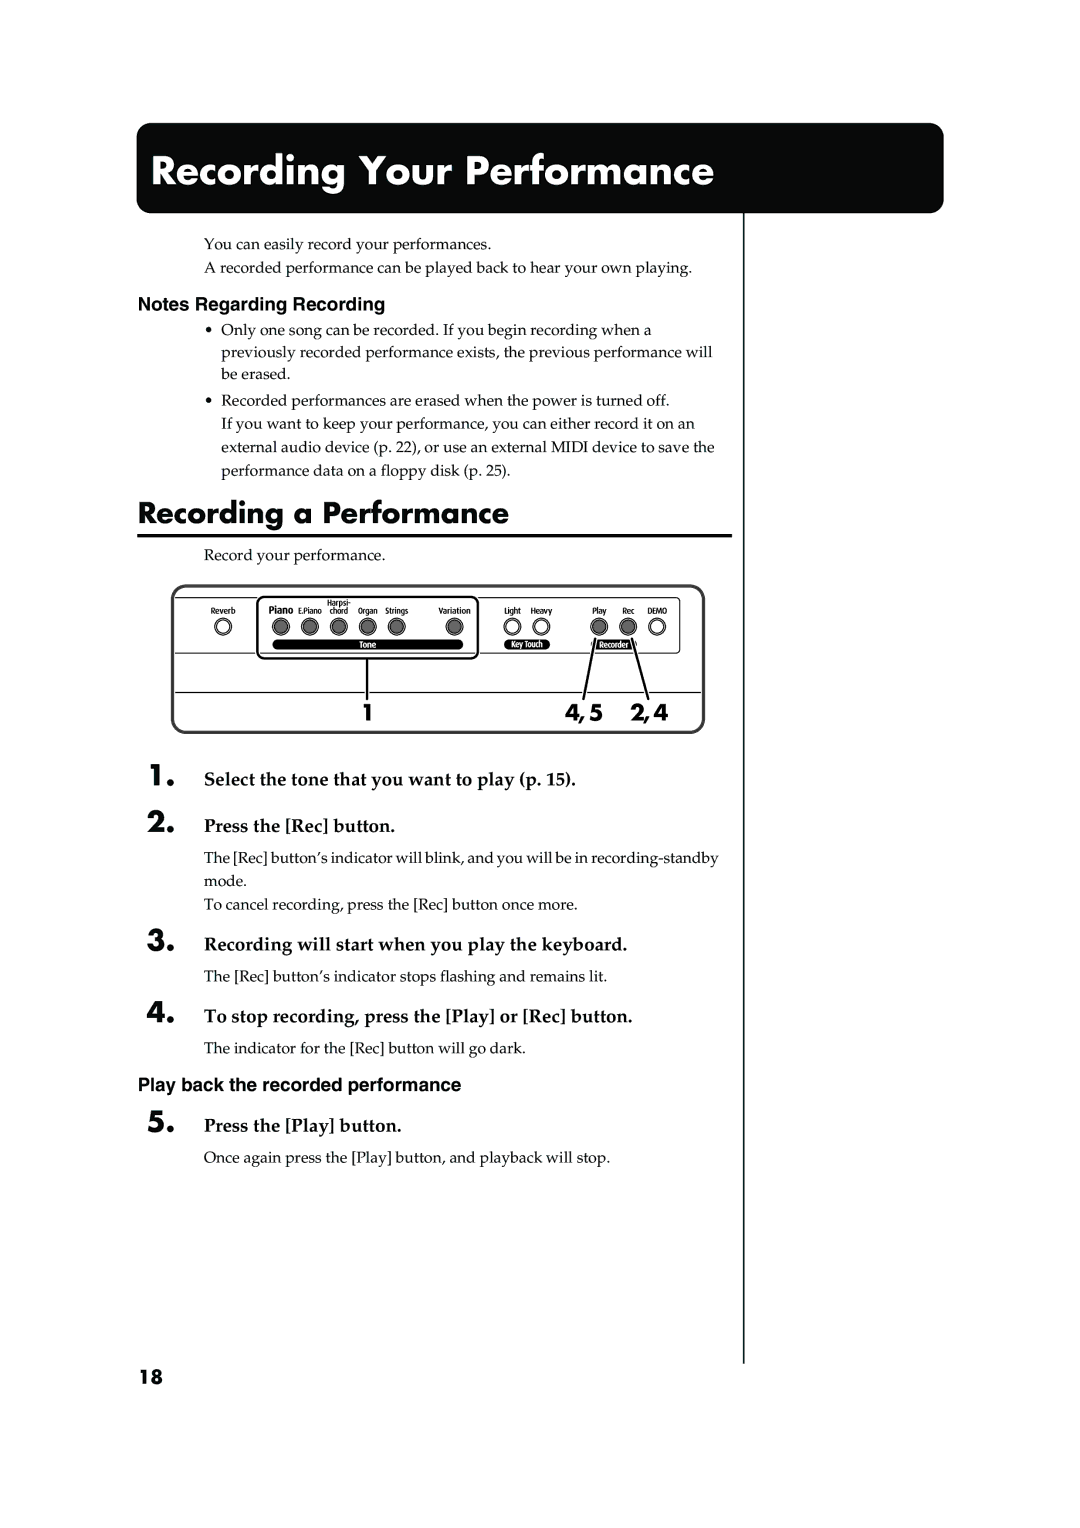 Roland F-50 owner manual Recording Your Performance, Recording a Performance 